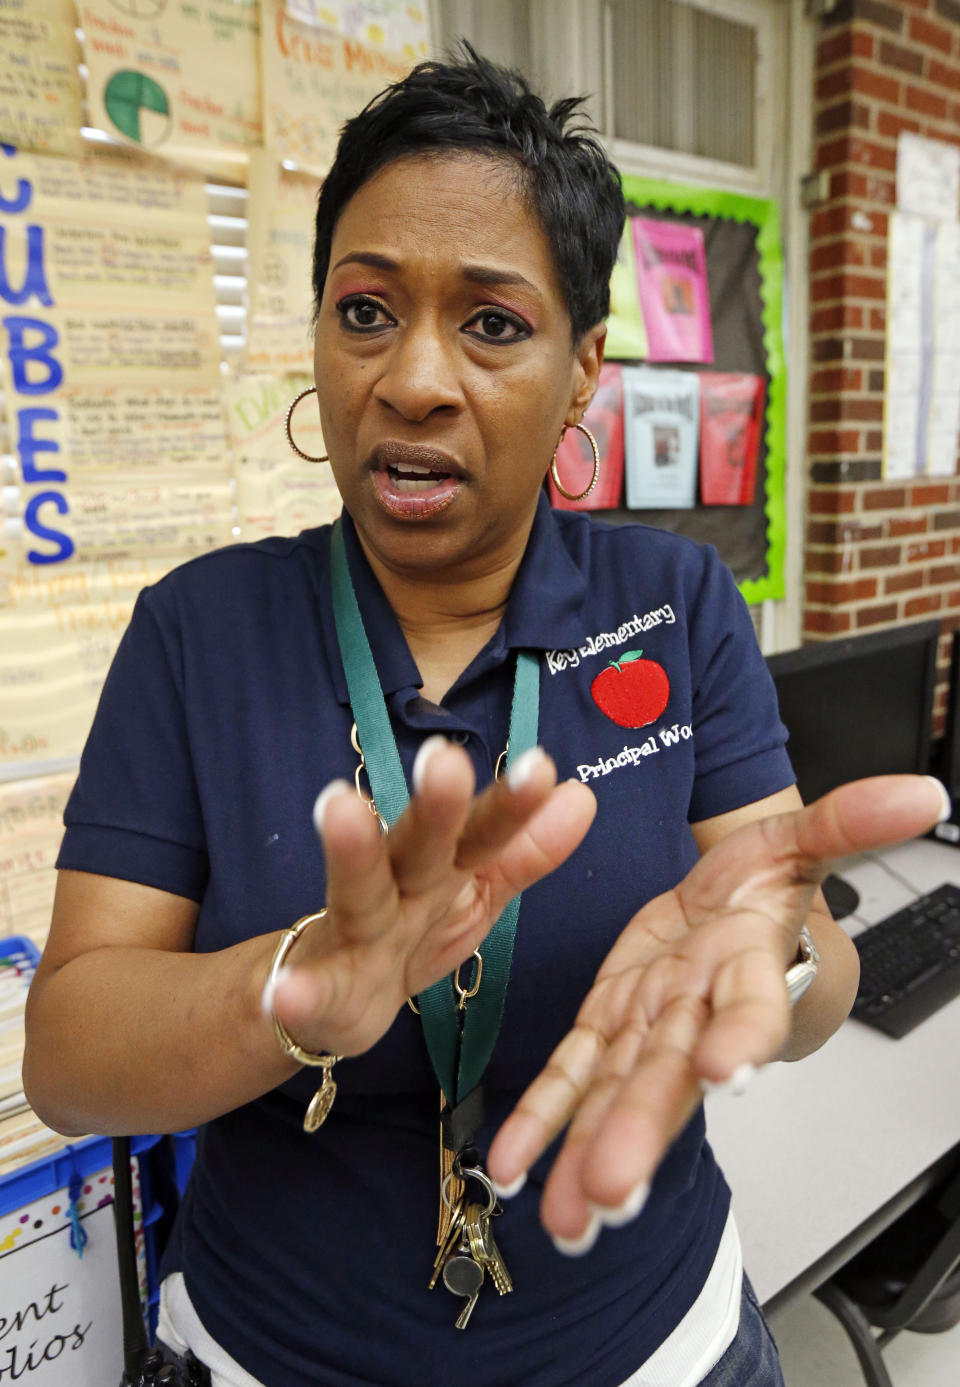 Key Elementary School principal Dionne Woody says her third grade teachers were plowing ahead with reading instruction at the Jackson, Miss., school, Thursday, April 18, 2019, even after their students took the state mandated reading tests, to ensure students are ready for fourth grade. The continued emphasis on reading also gives kids who fail initially a fighting chance on a retest. (AP Photo/Rogelio V. Solis)